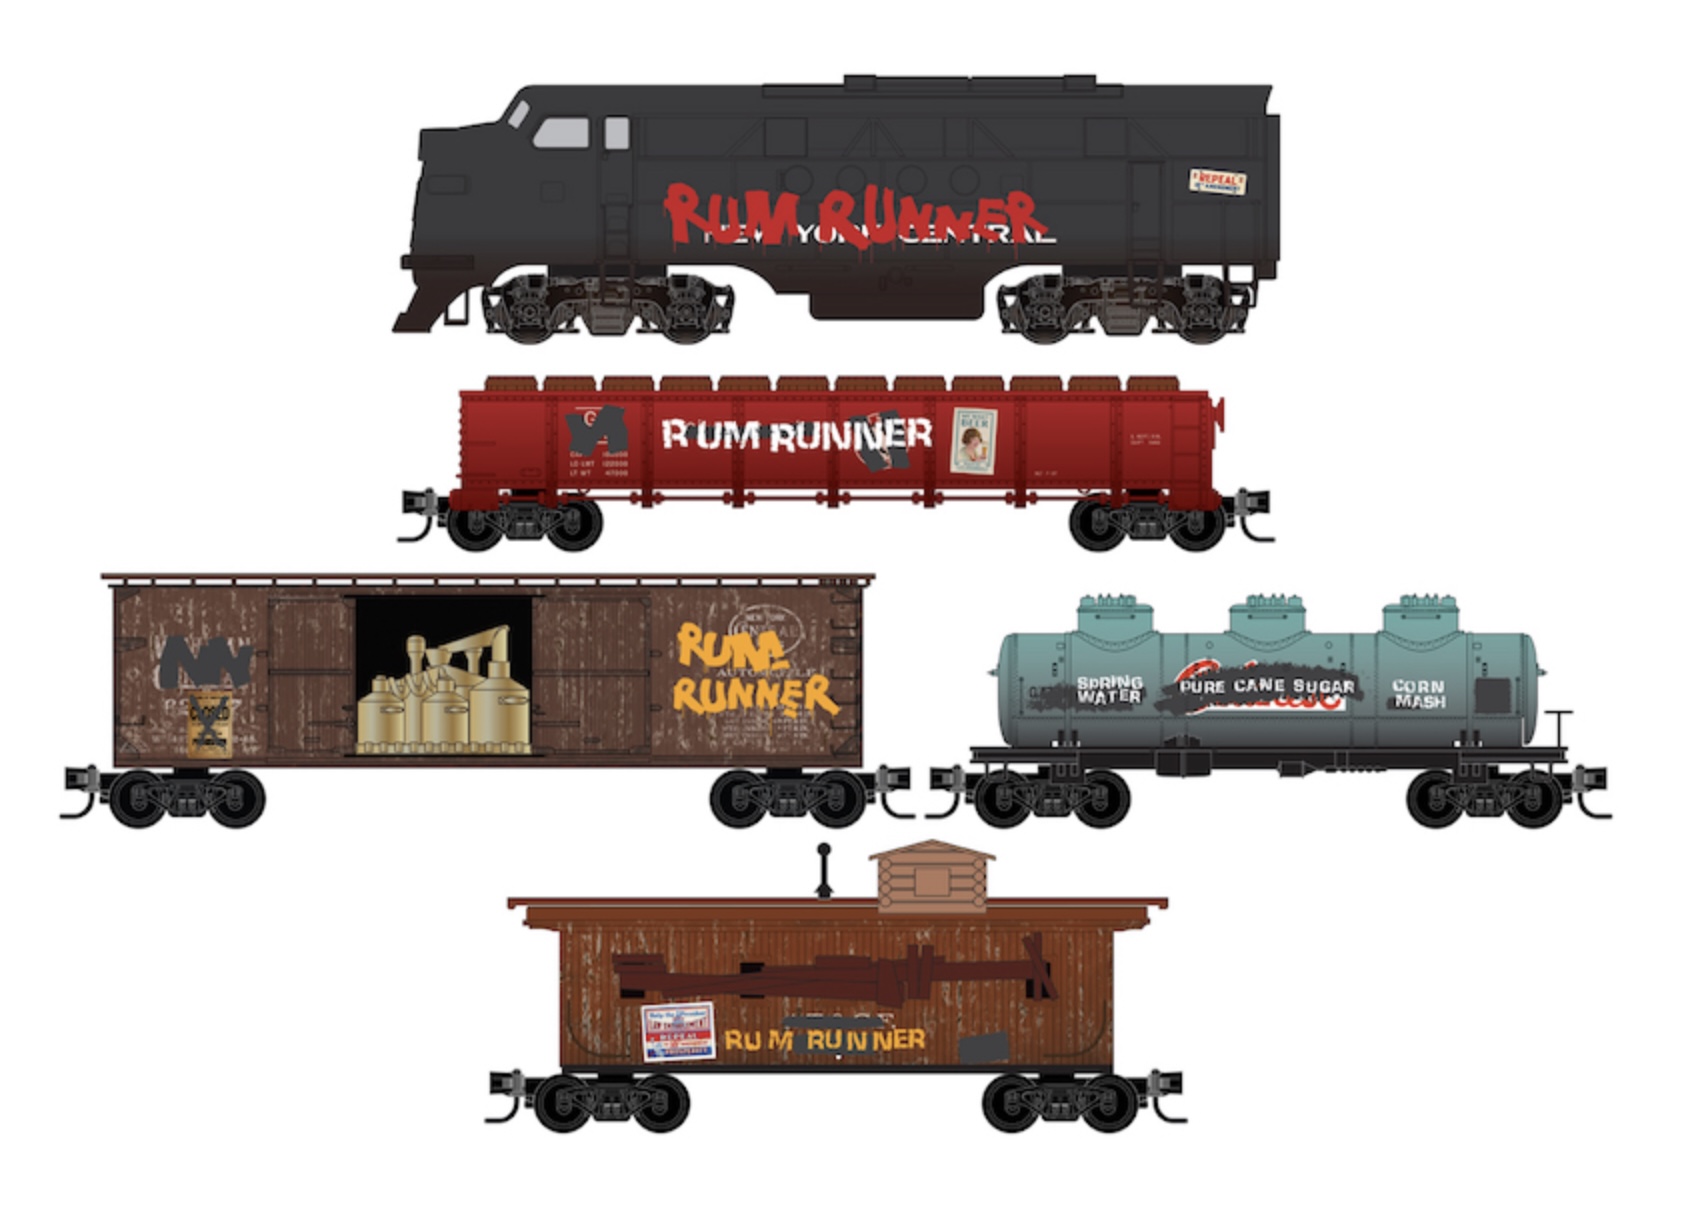 N Scale - Micro-Trains - 993 21 383 - Freight Train, Diesel, North American, Transition Era - Painted/Lettered - 